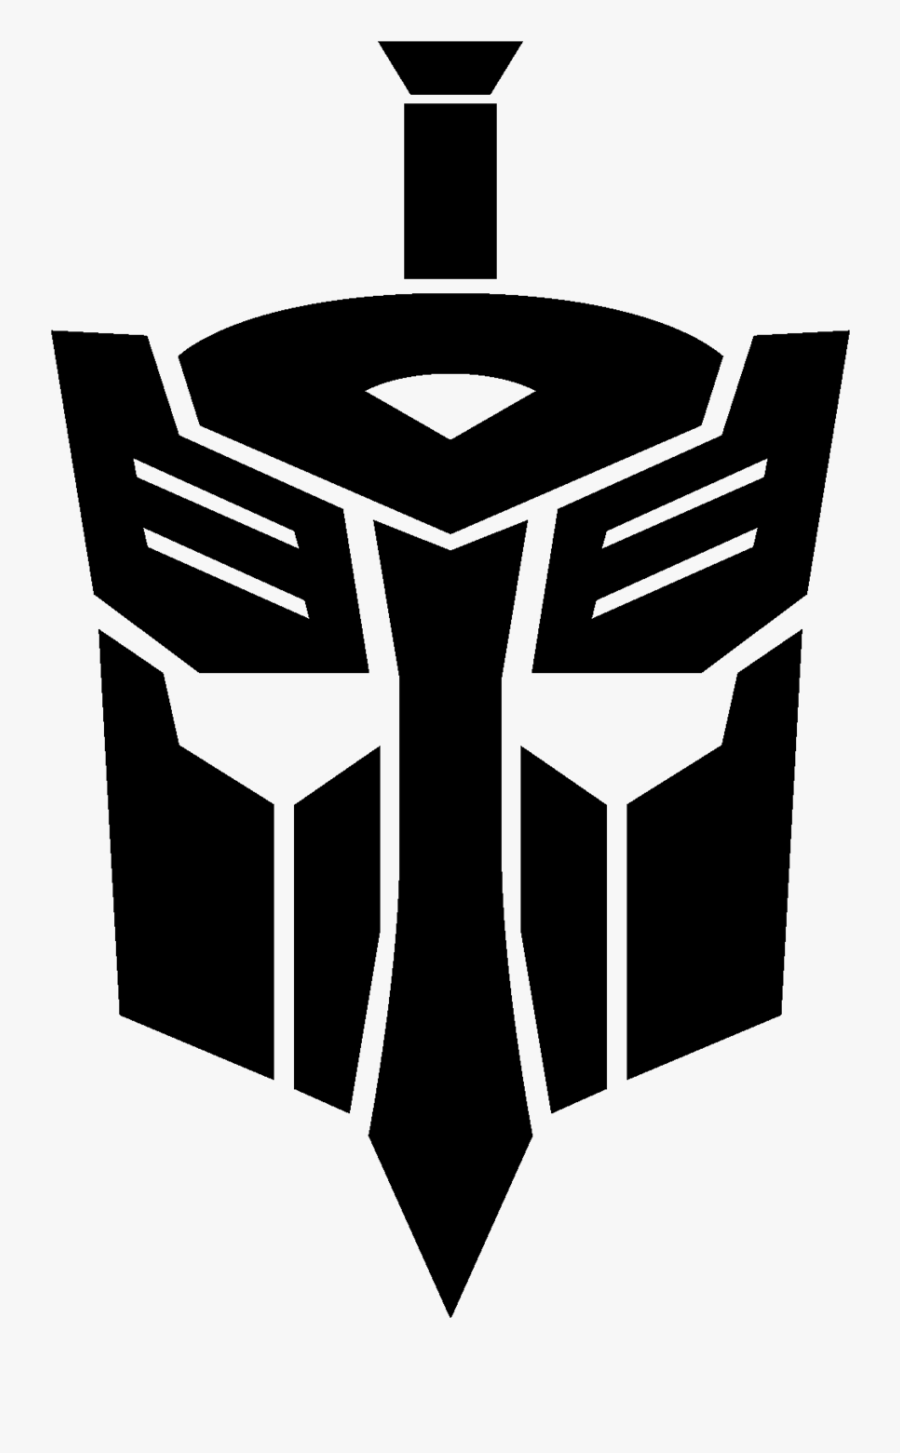 Transformers Generation 2 Cybertronian Symbol By Mr-droy - Logo Transformers, Transparent Clipart